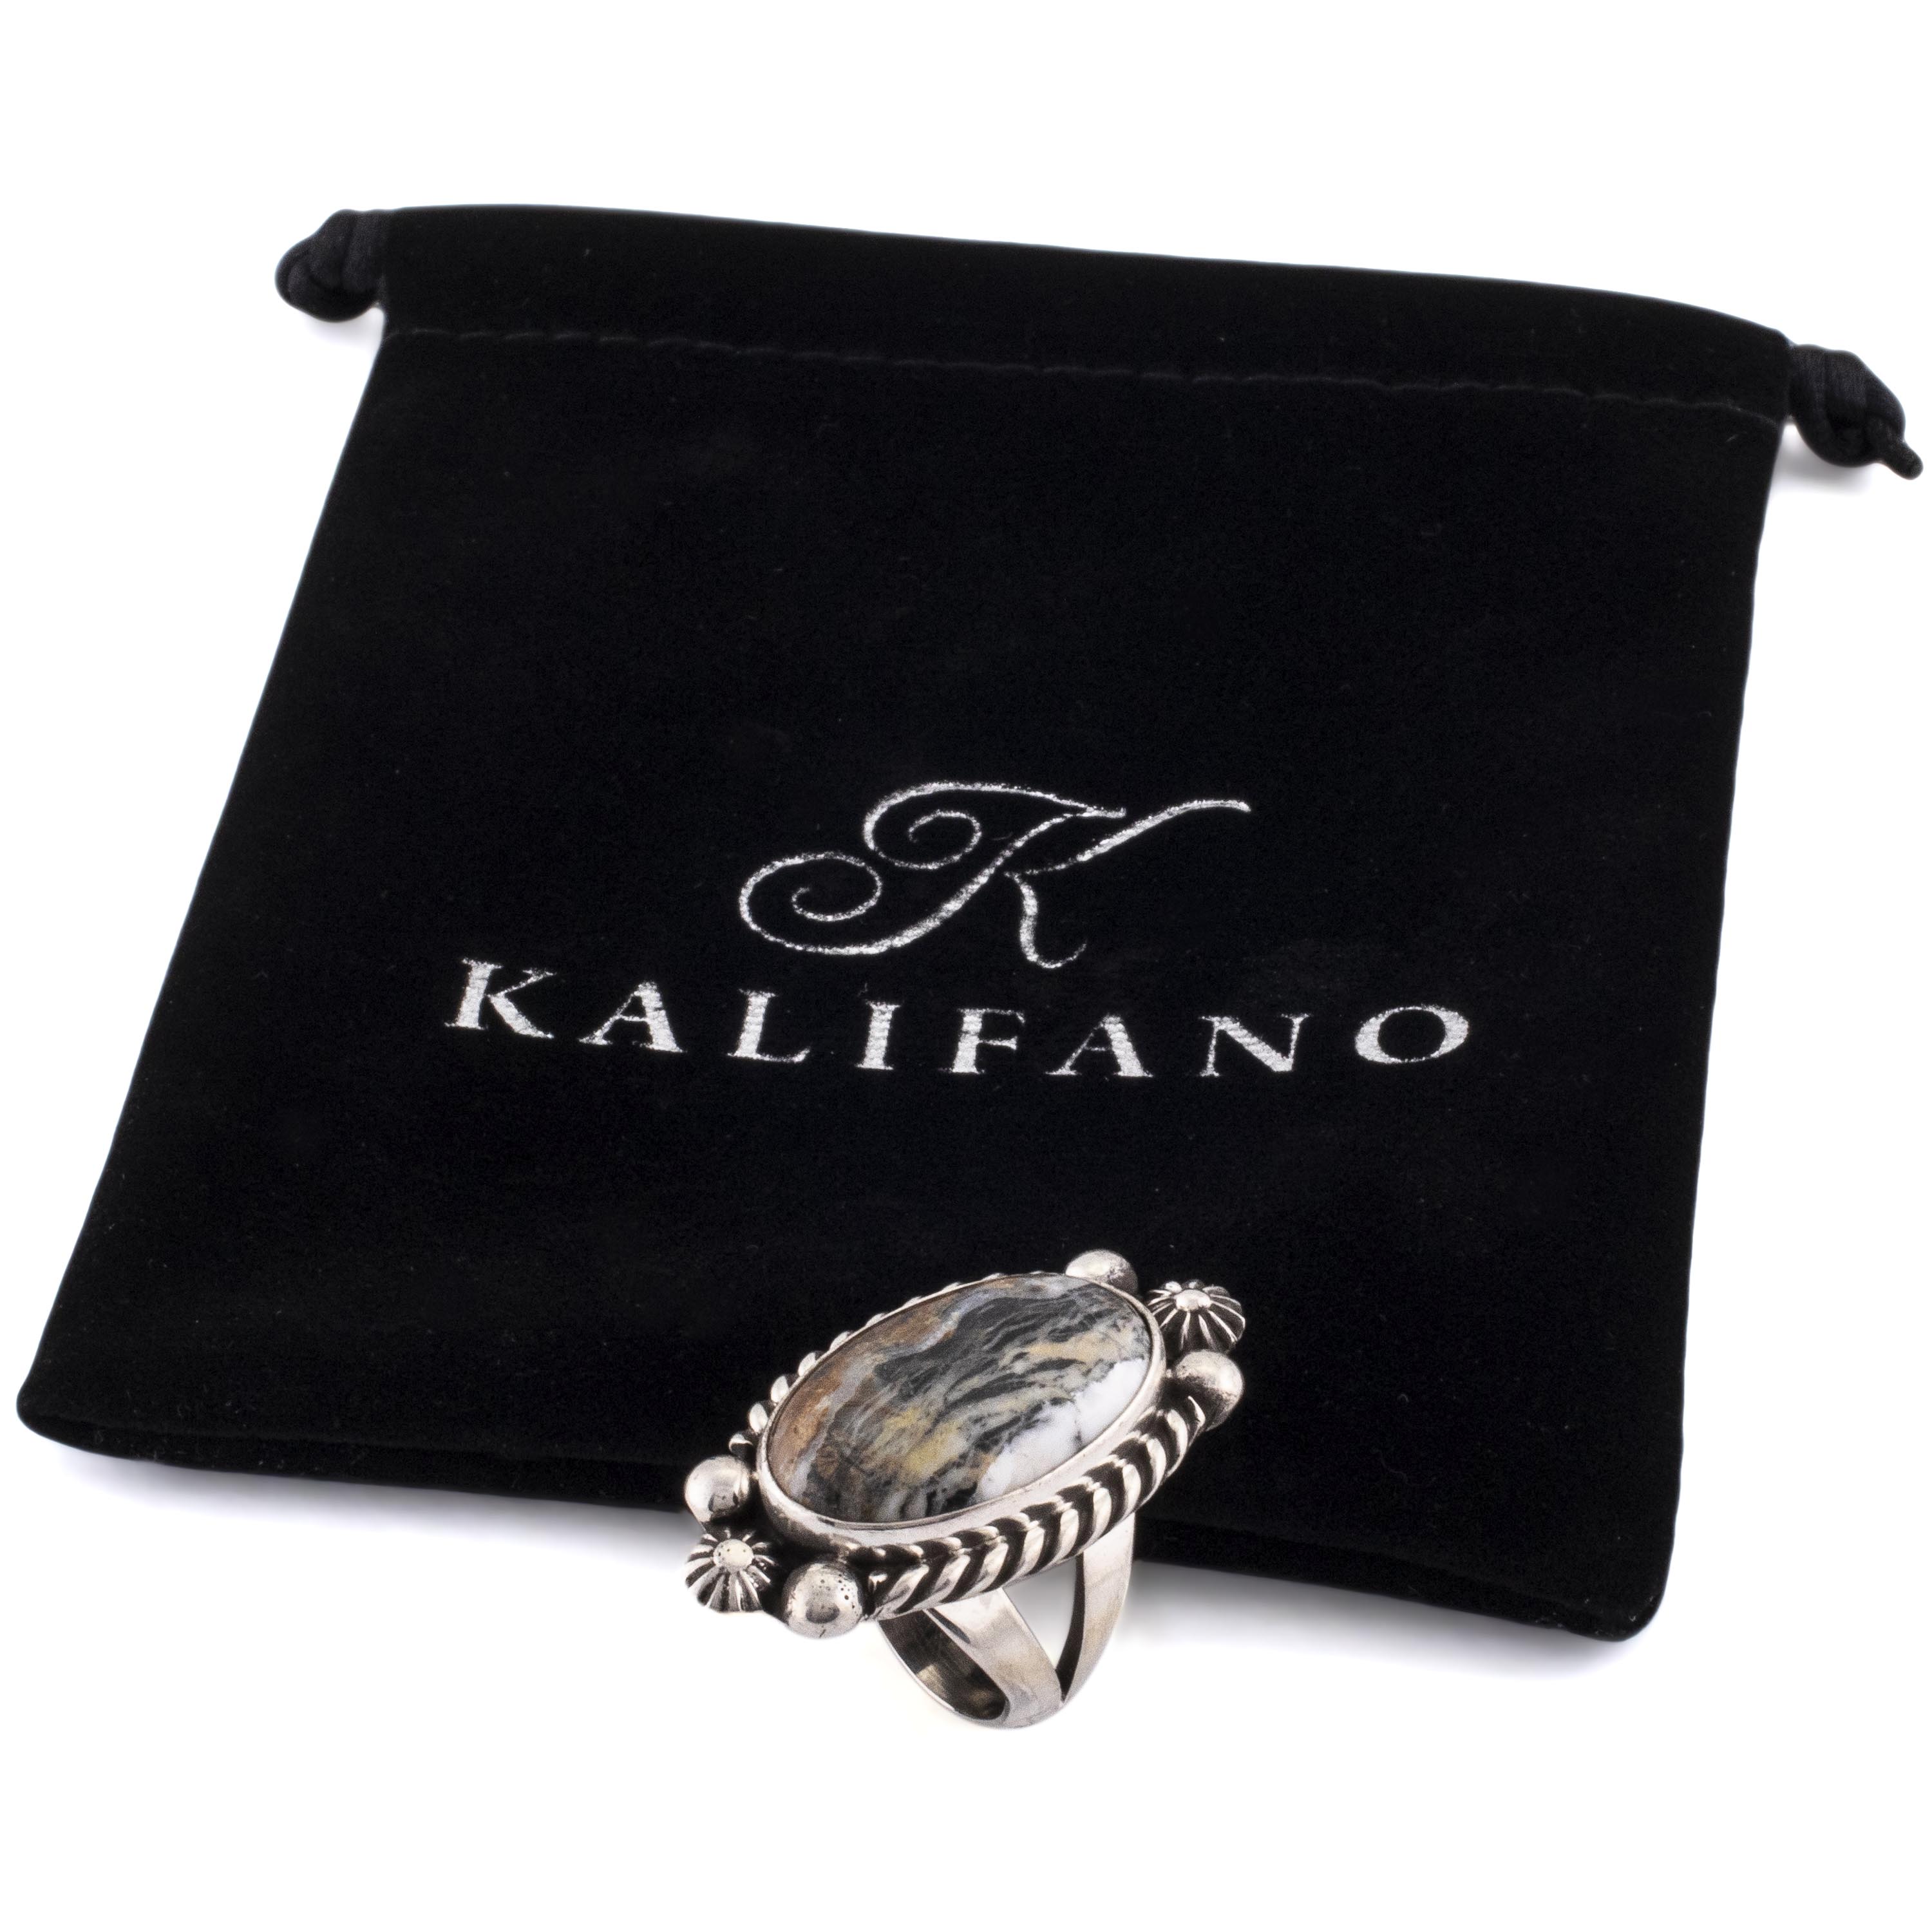 Kalifano Native American Jewelry 7 Eddie Secatero Navajo White Buffalo Turquoise USA Native American Made 925 Sterling Silver Ring NAR800.031.7